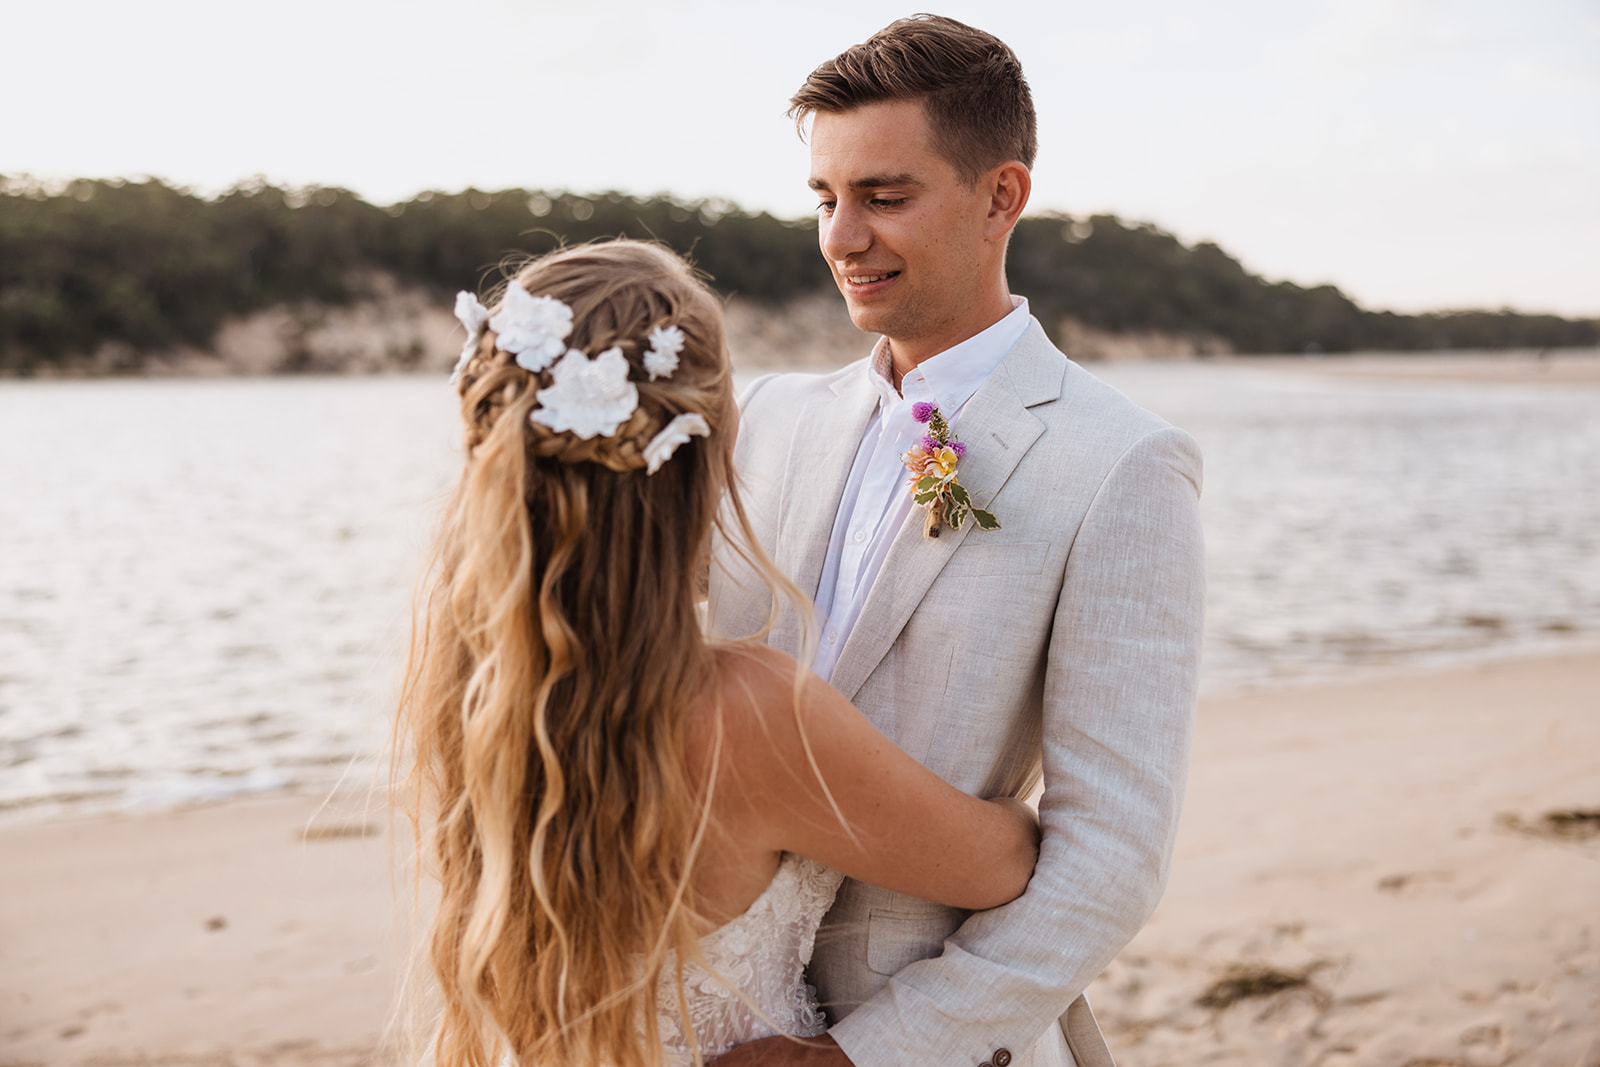 Bridal Portraits at the Wedding in The Cove Jervis Bay